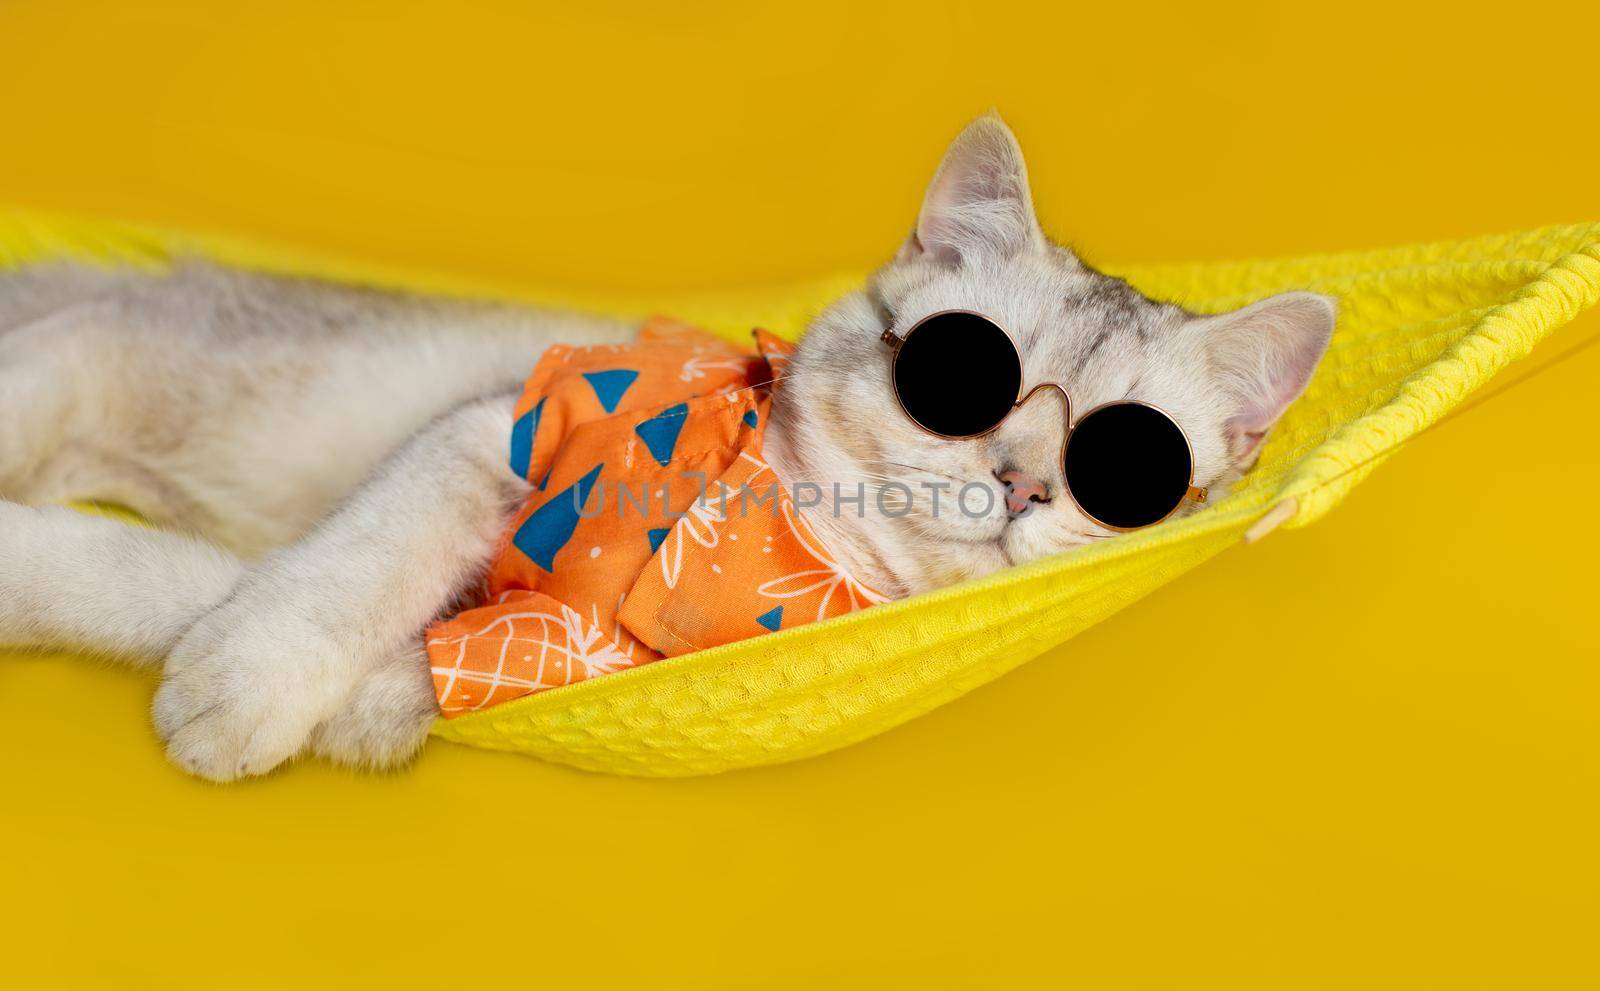 Funny white cat in black sunglasses and an orange shirt, lies on a yellow fabric hammock, isolated on a yellow background. Copy space